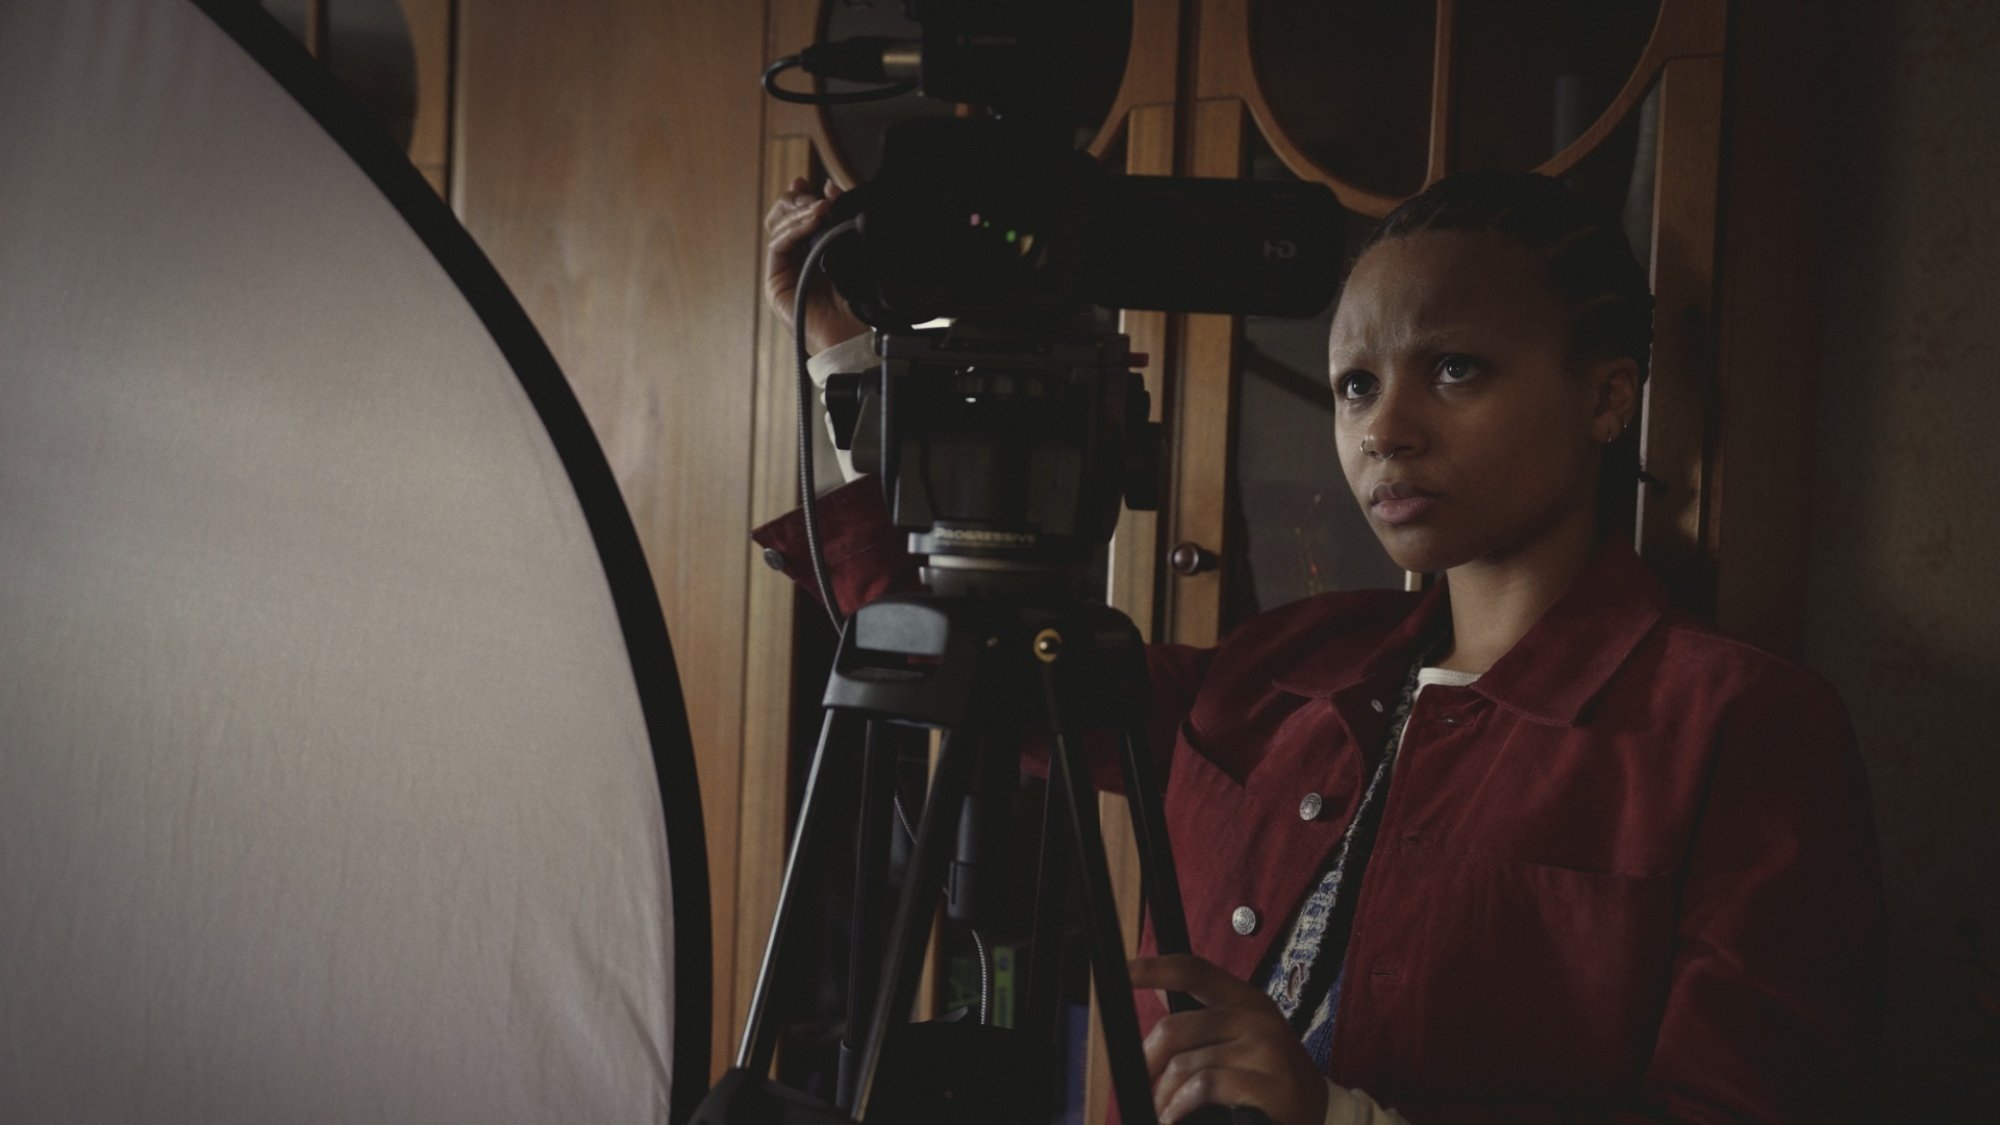 A young woman in a red shirt stands behind a camera.